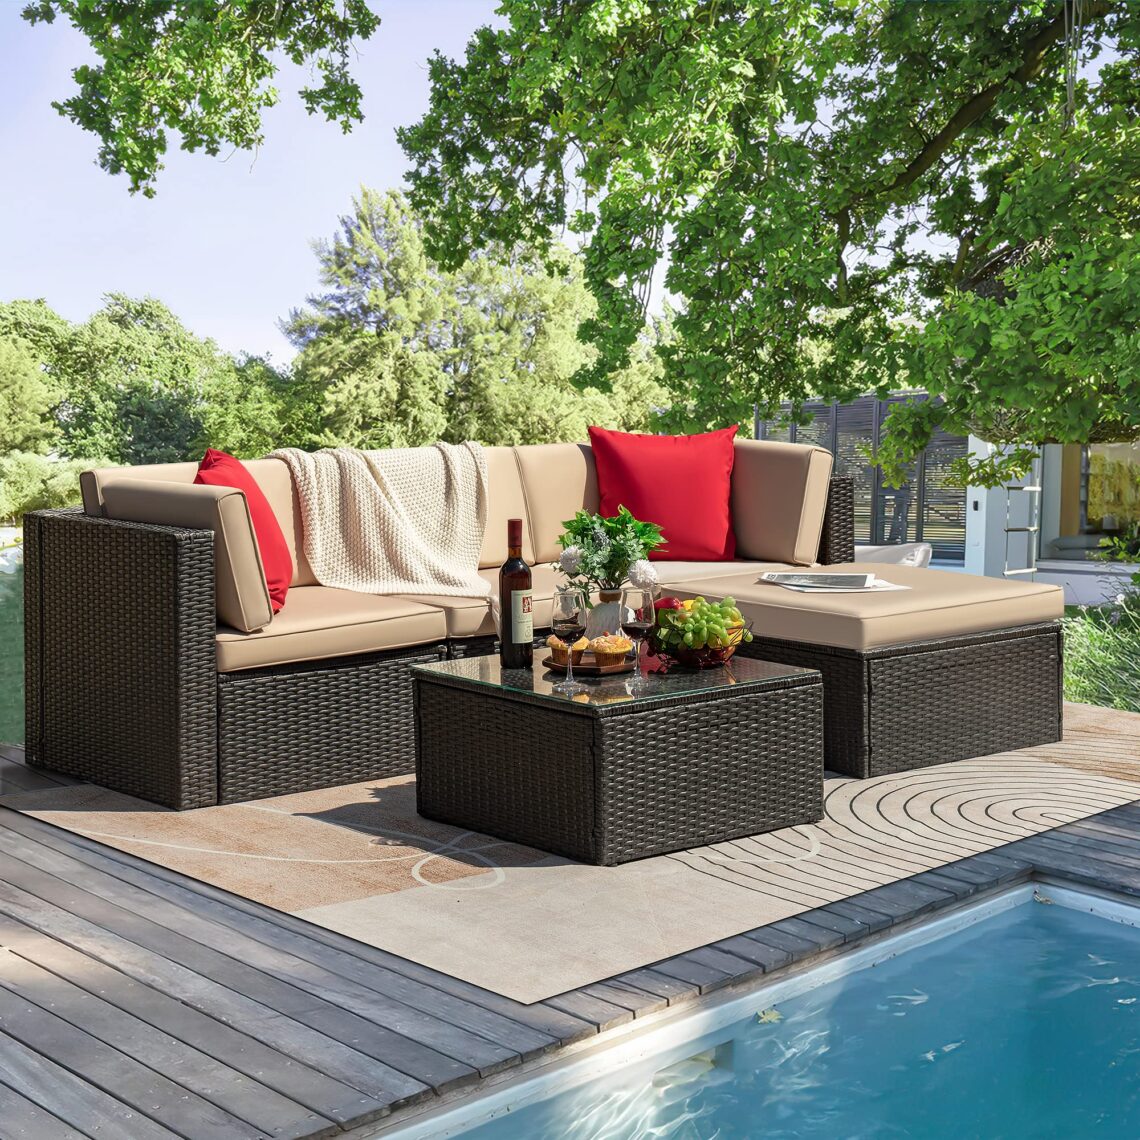 Revamp Your Backyard: 10 Outdoor Furniture Ideas for Summer 1